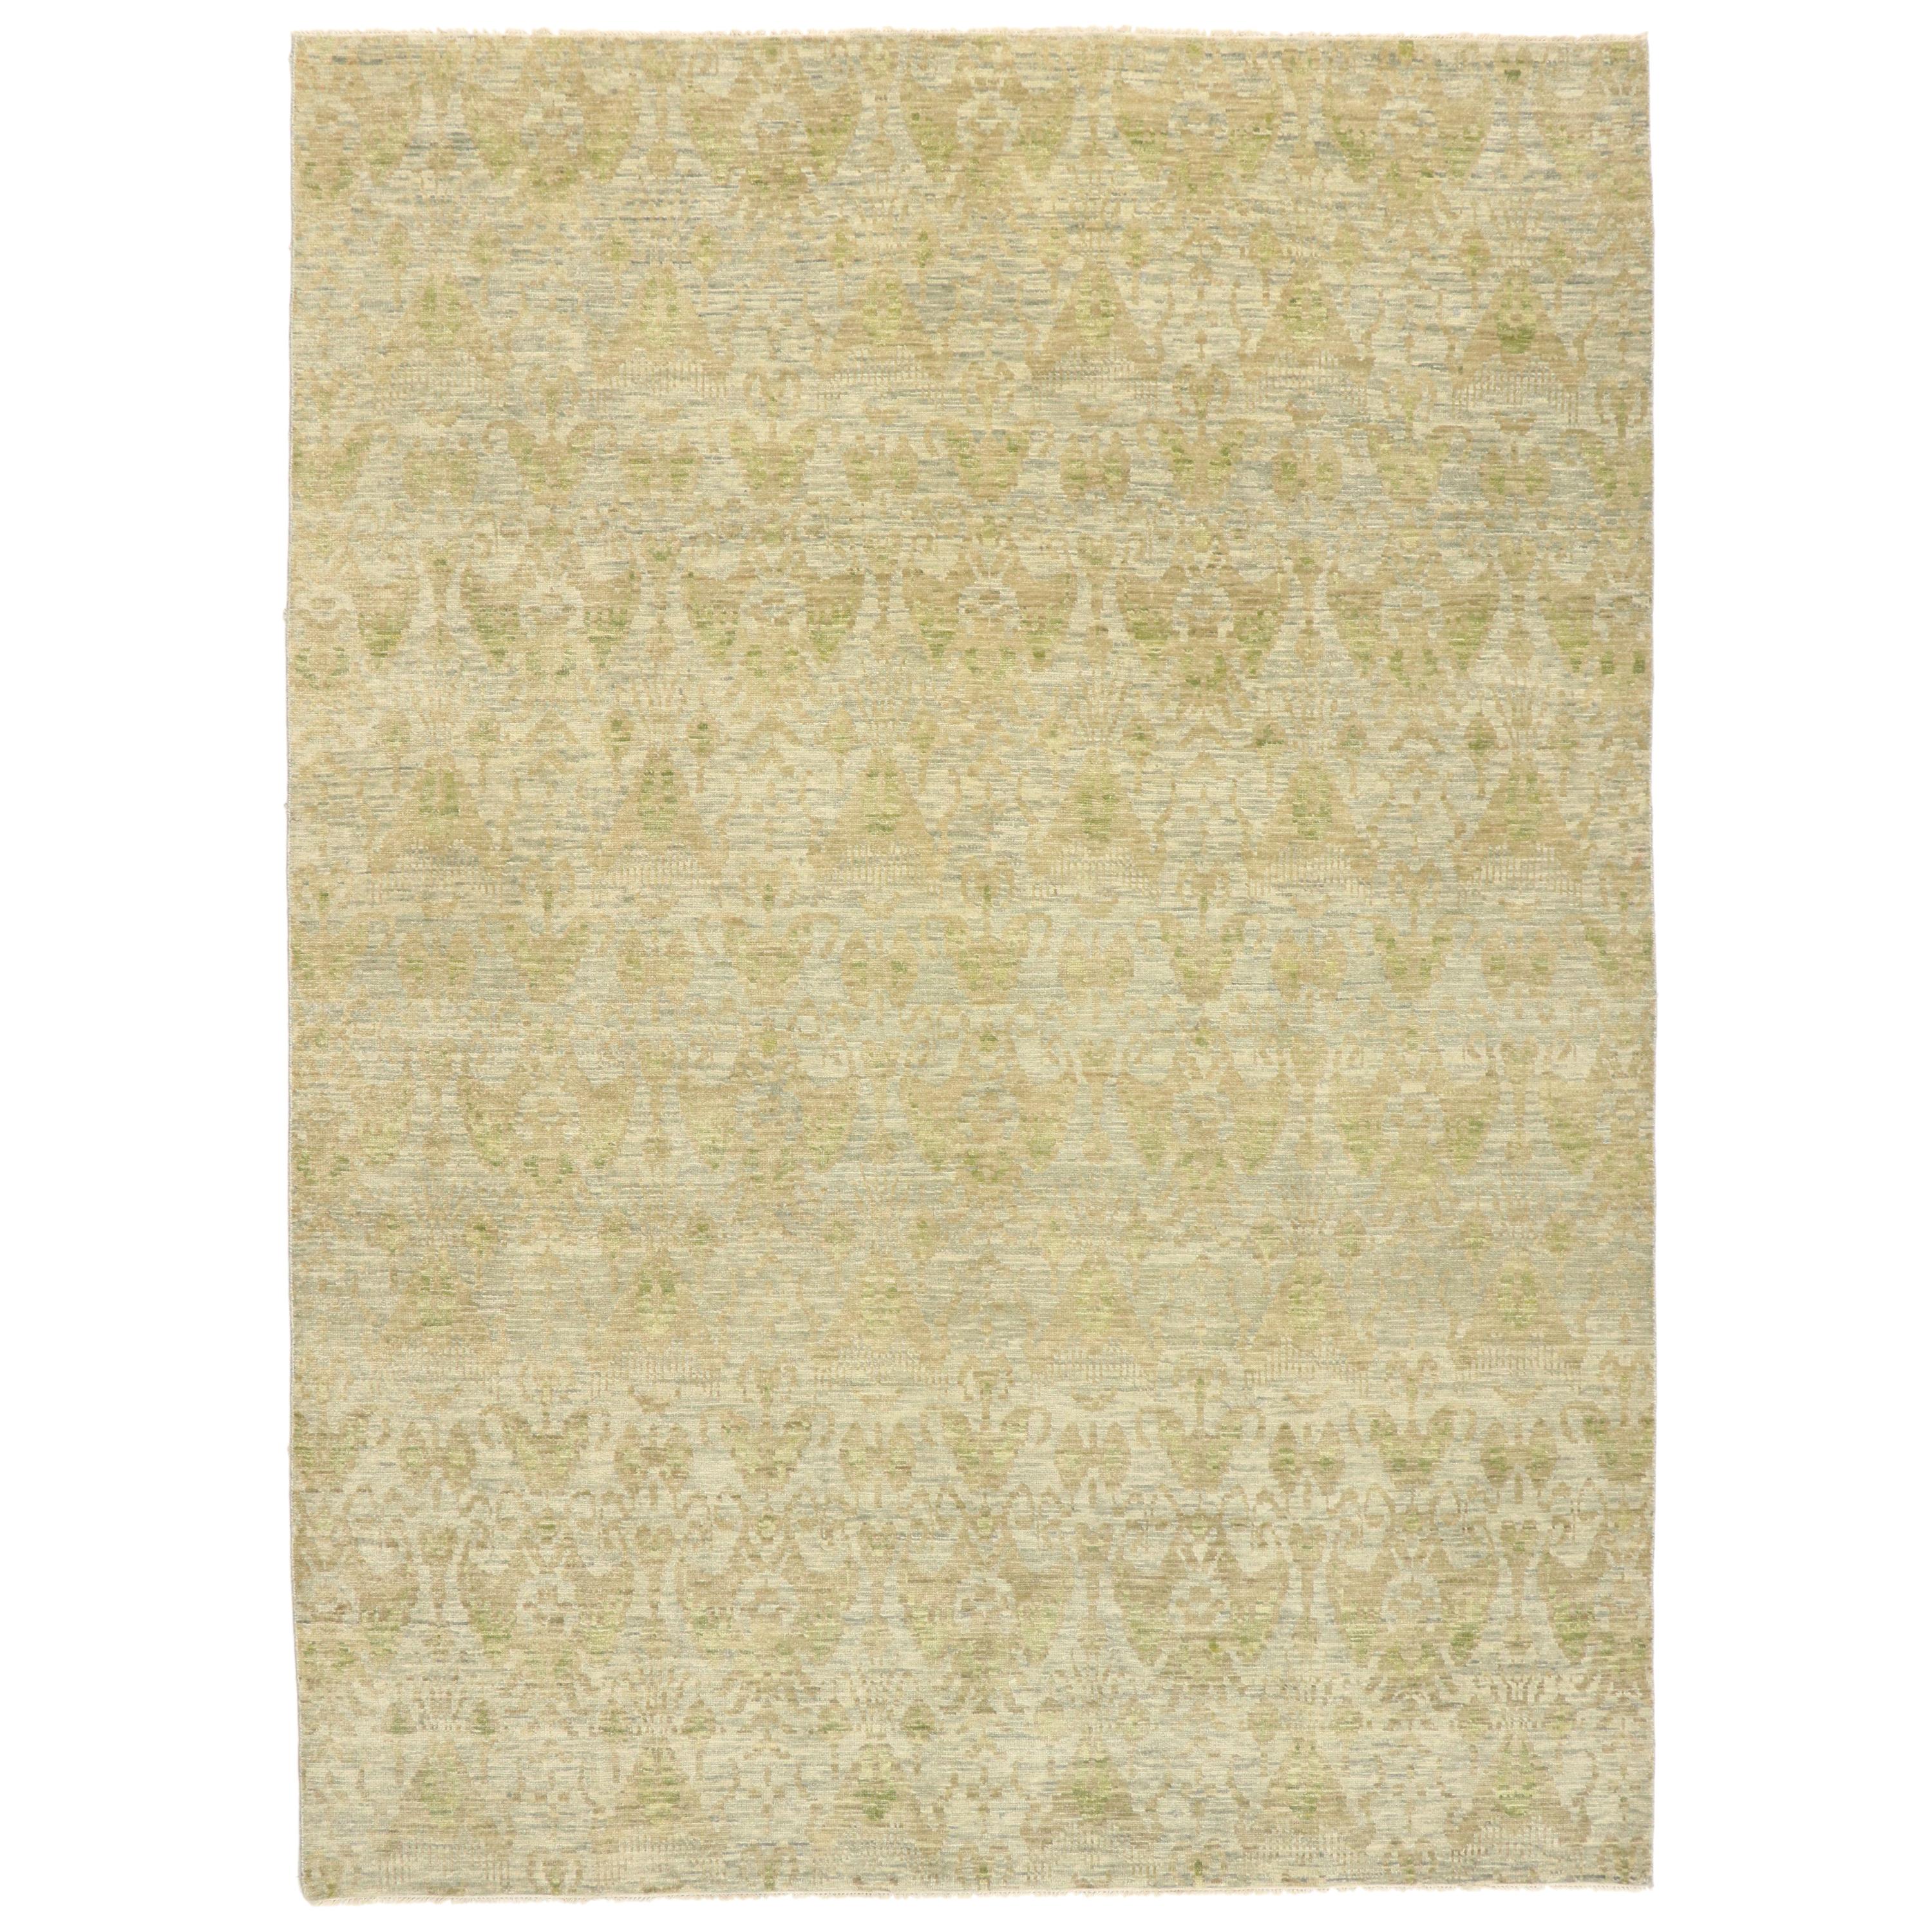 New Transitional Ikat Area Rug with Modern Design, Neutral Color Area Rug